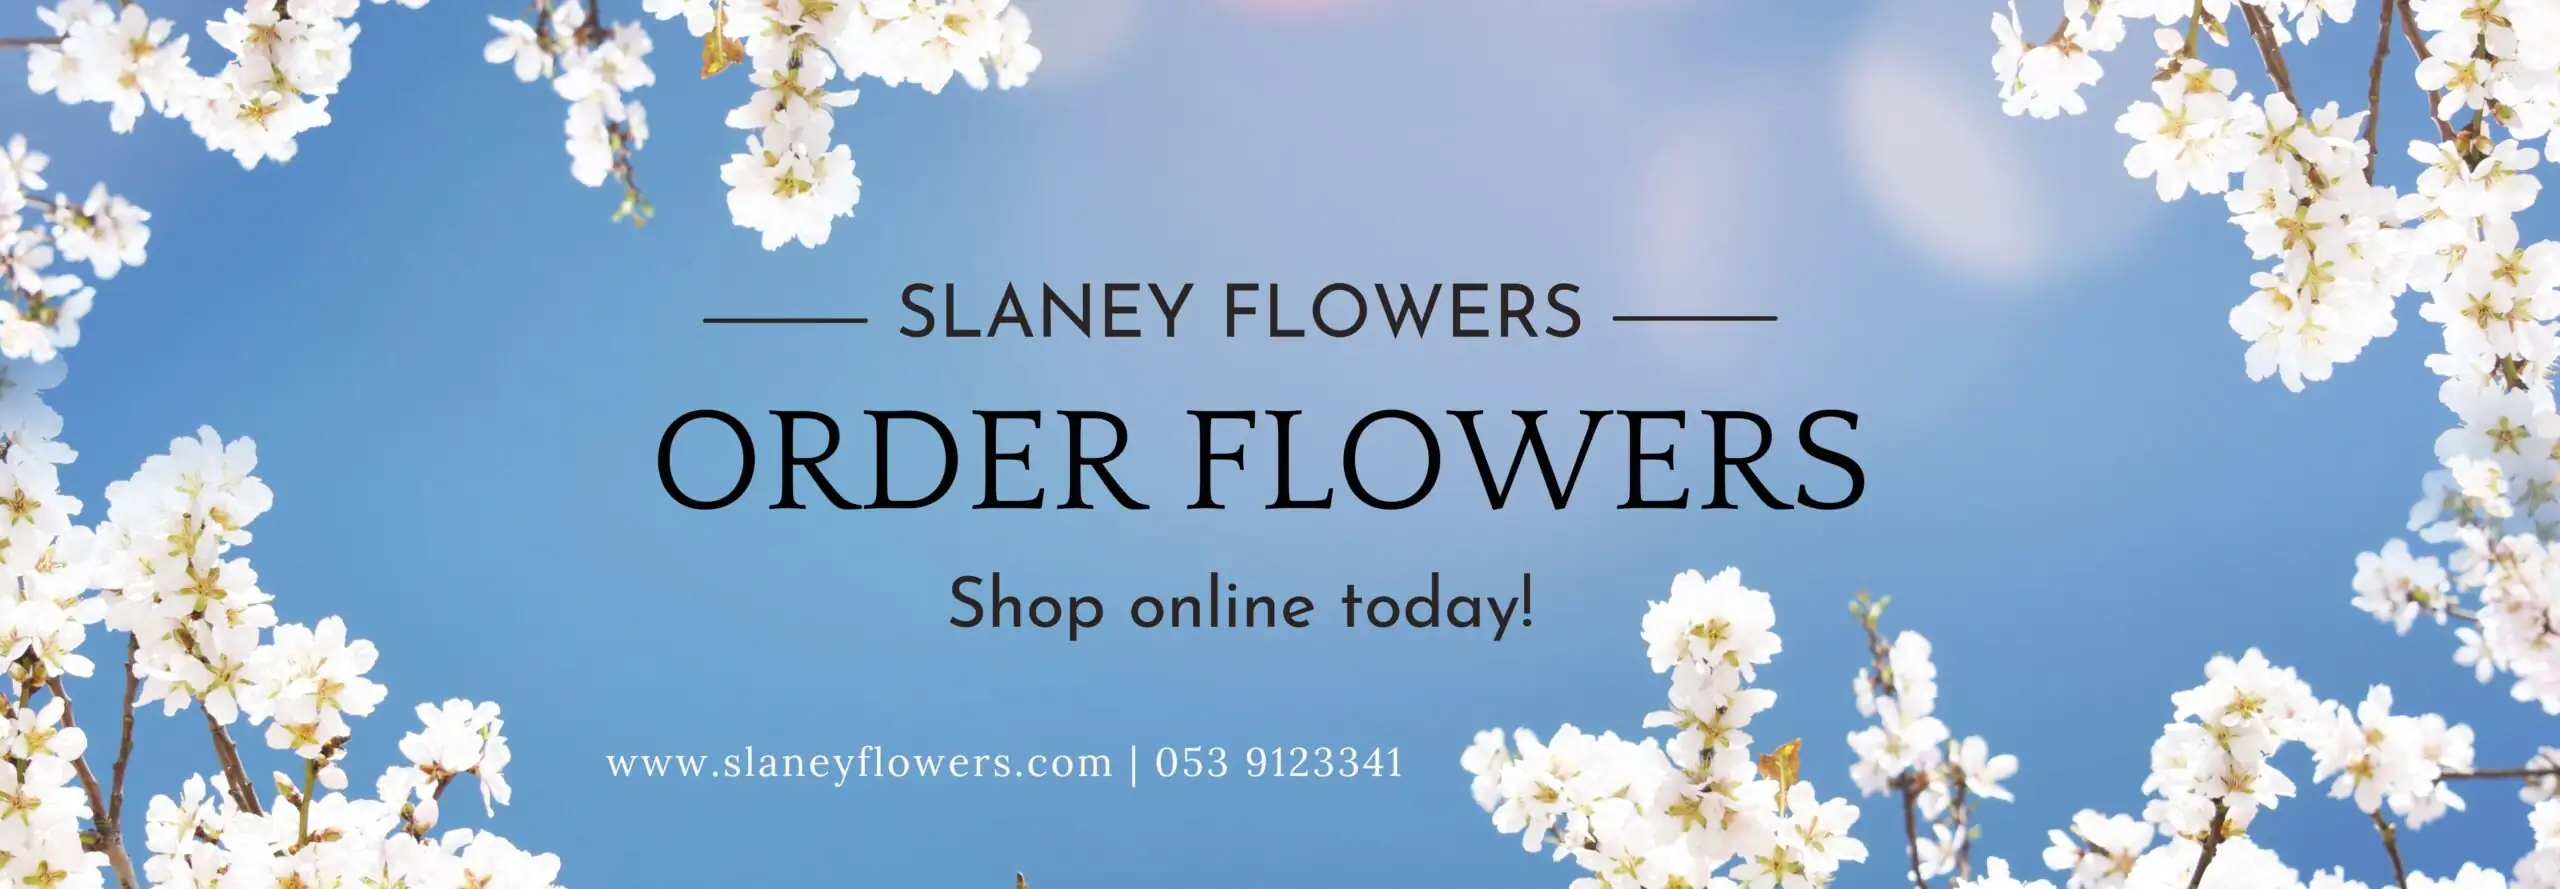 florists-website-banners-63-scaled